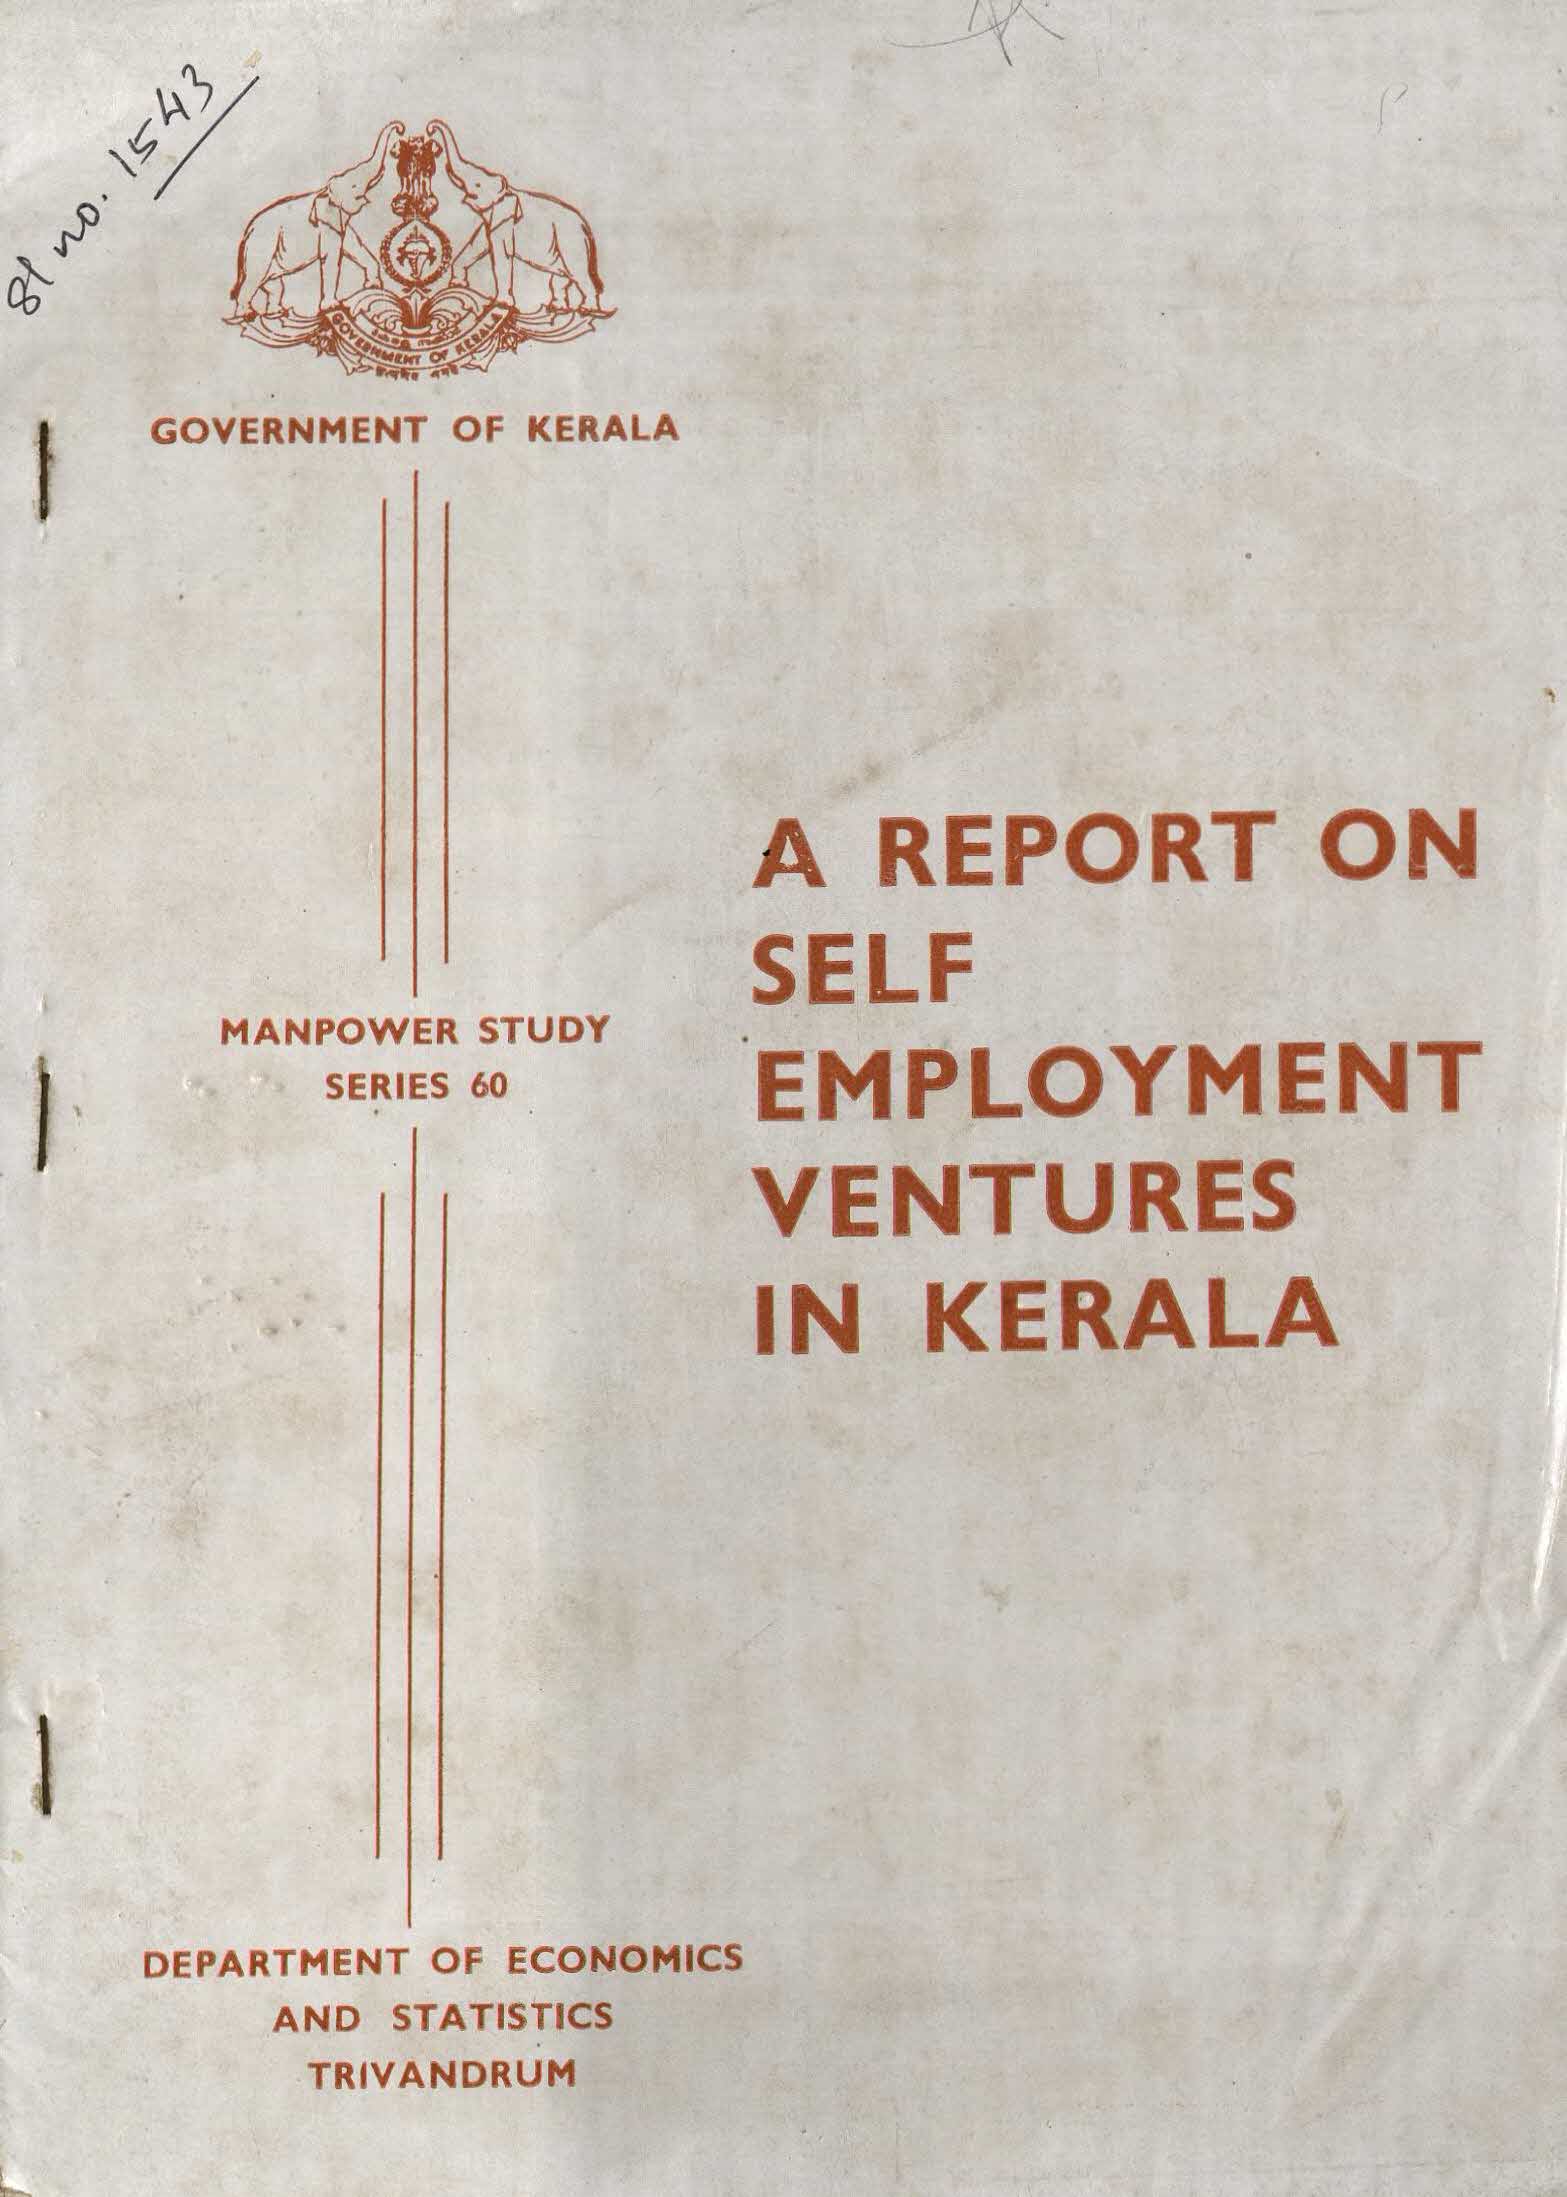 A REPORT ON SELF EMPLOYMENT VENTURES IN KERALA